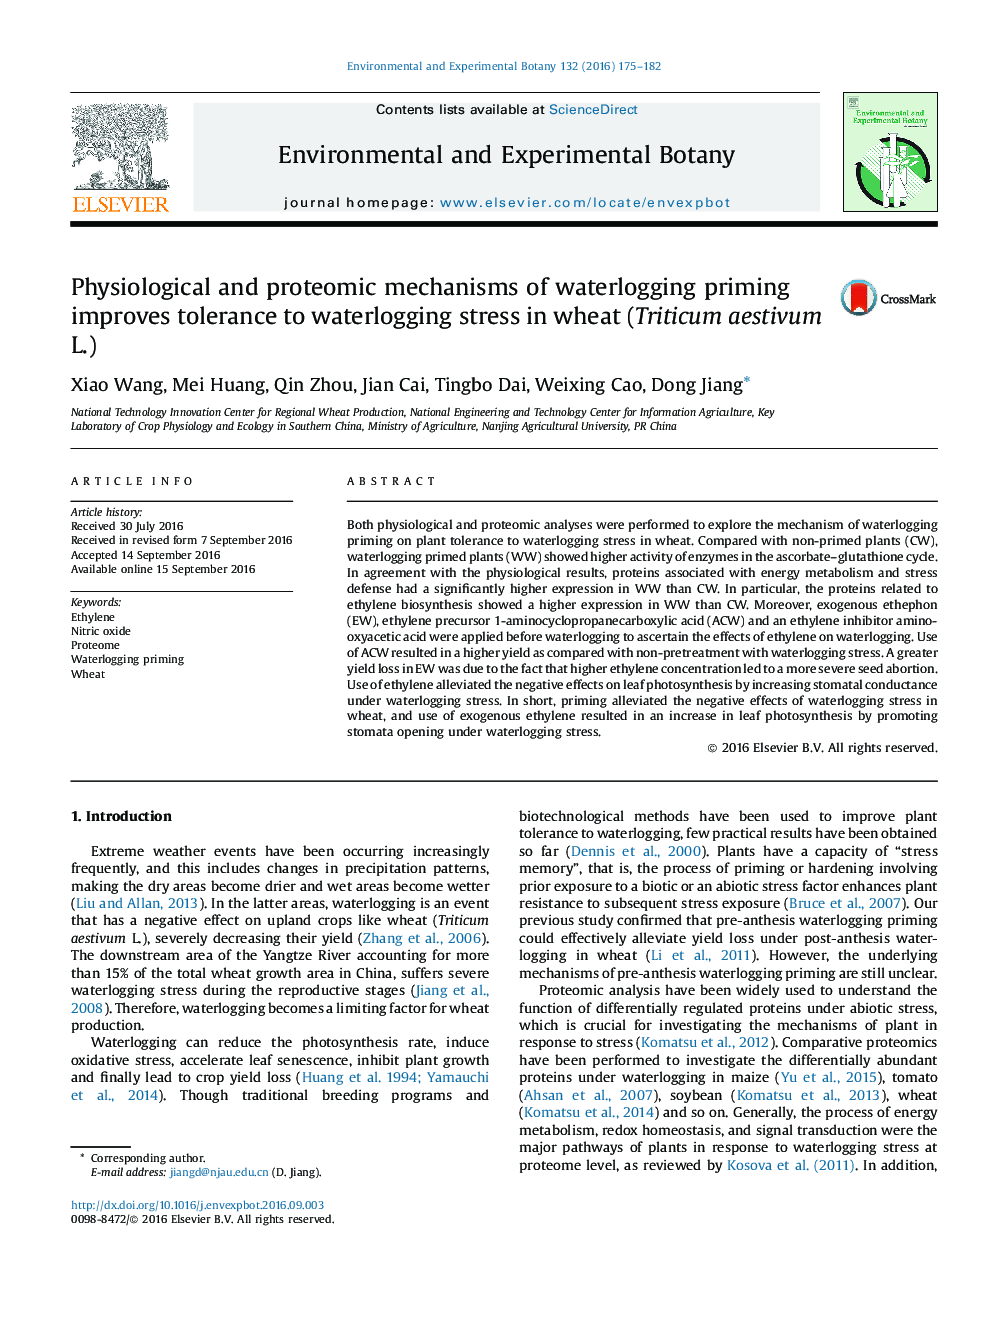 Physiological and proteomic mechanisms of waterlogging priming improves tolerance to waterlogging stress in wheat (Triticum aestivum L.)